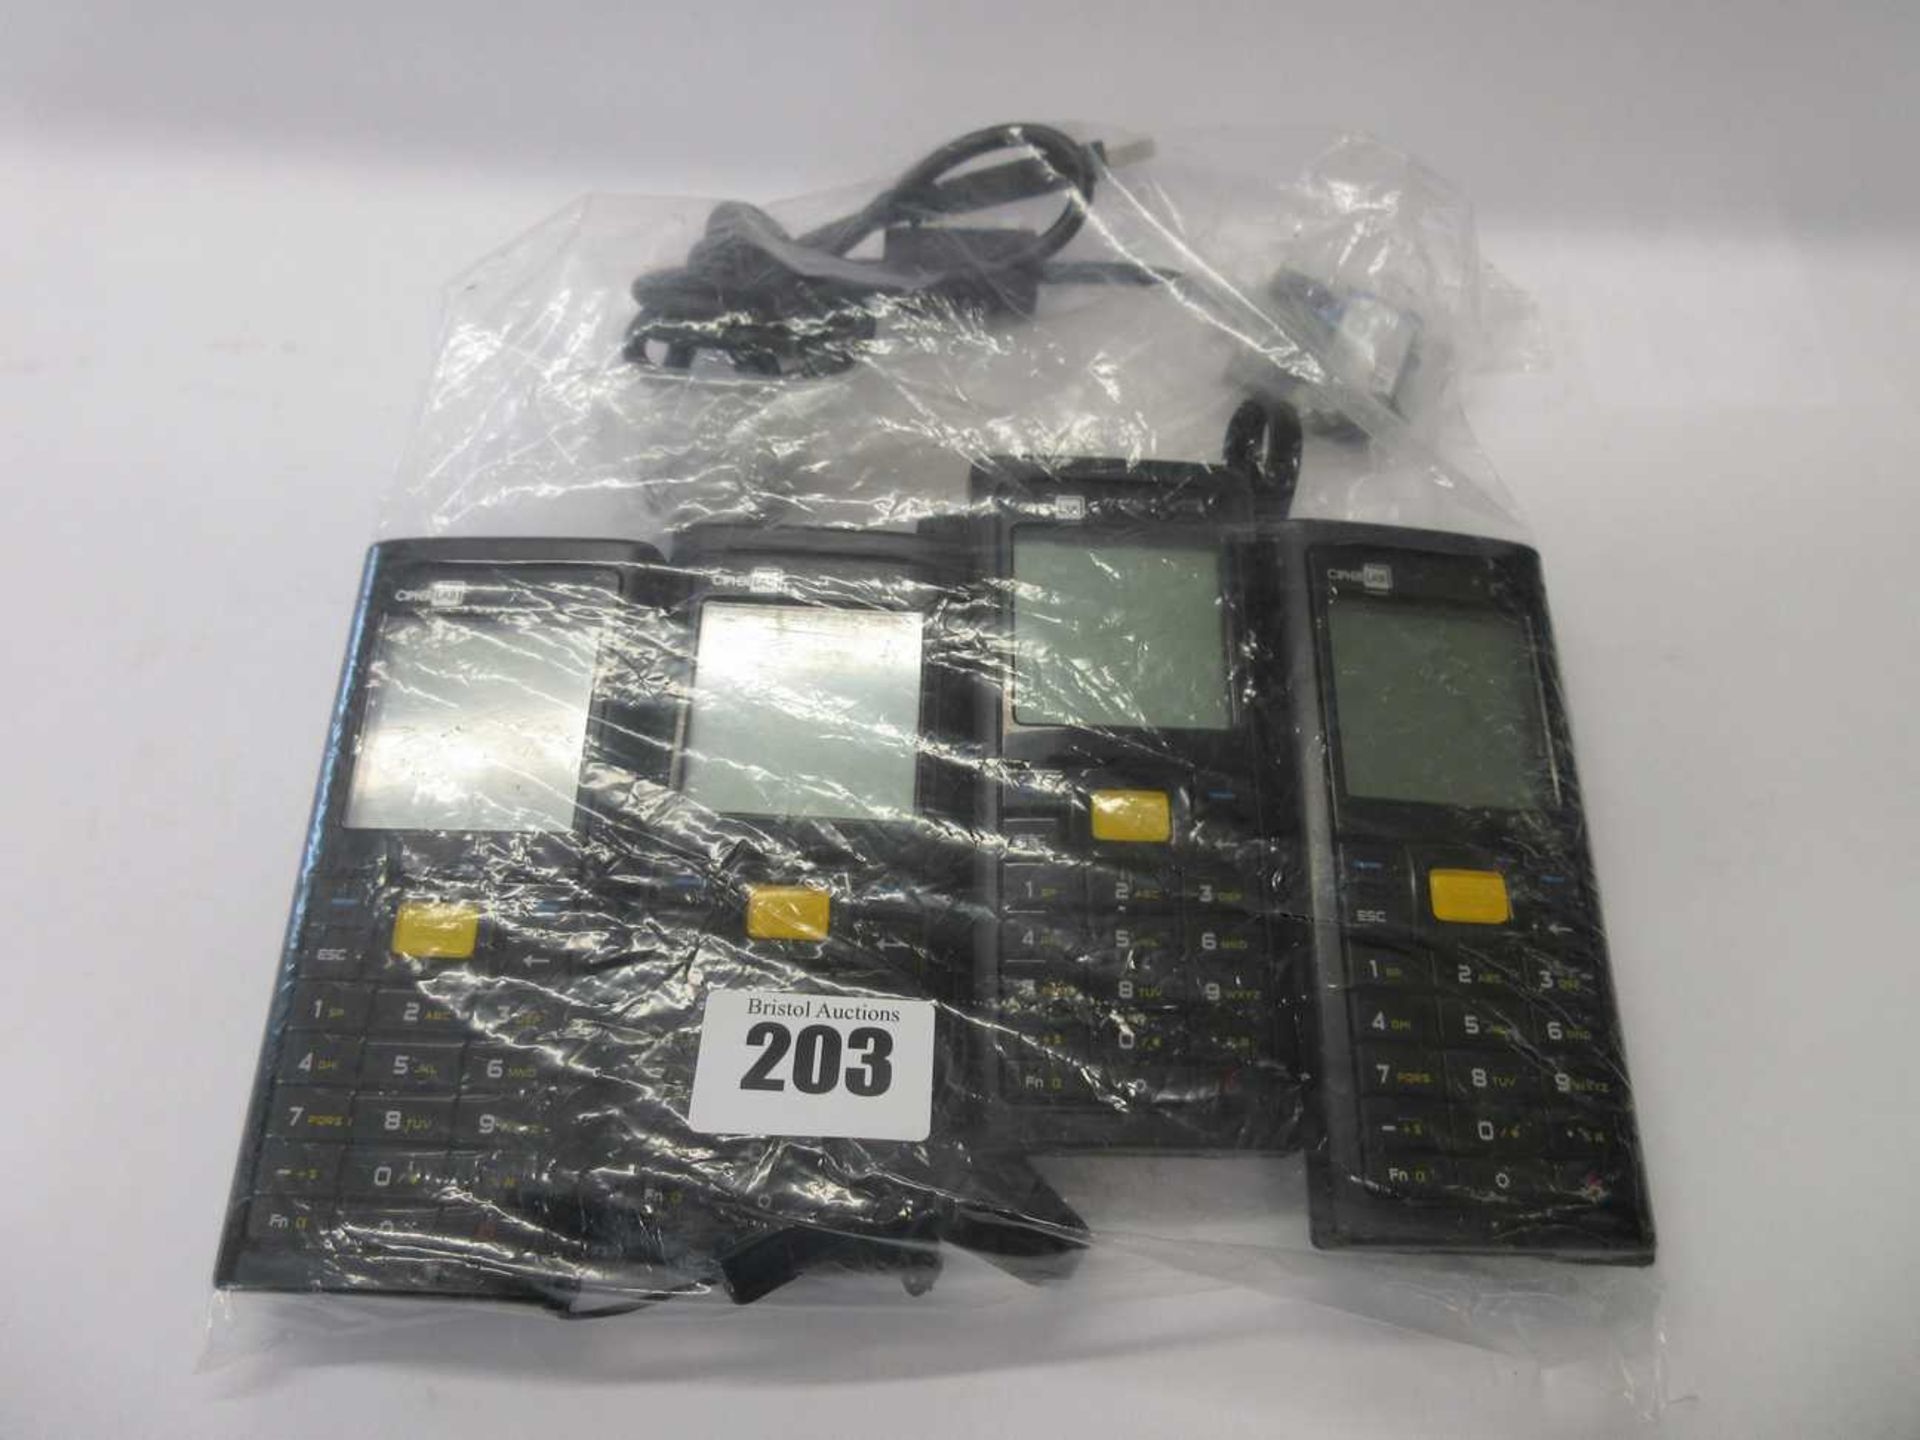 Four pre-owned CipherLab 8230 L-4M-24K Enterprise Mobile Computer/Barcode Scanners with USB charging